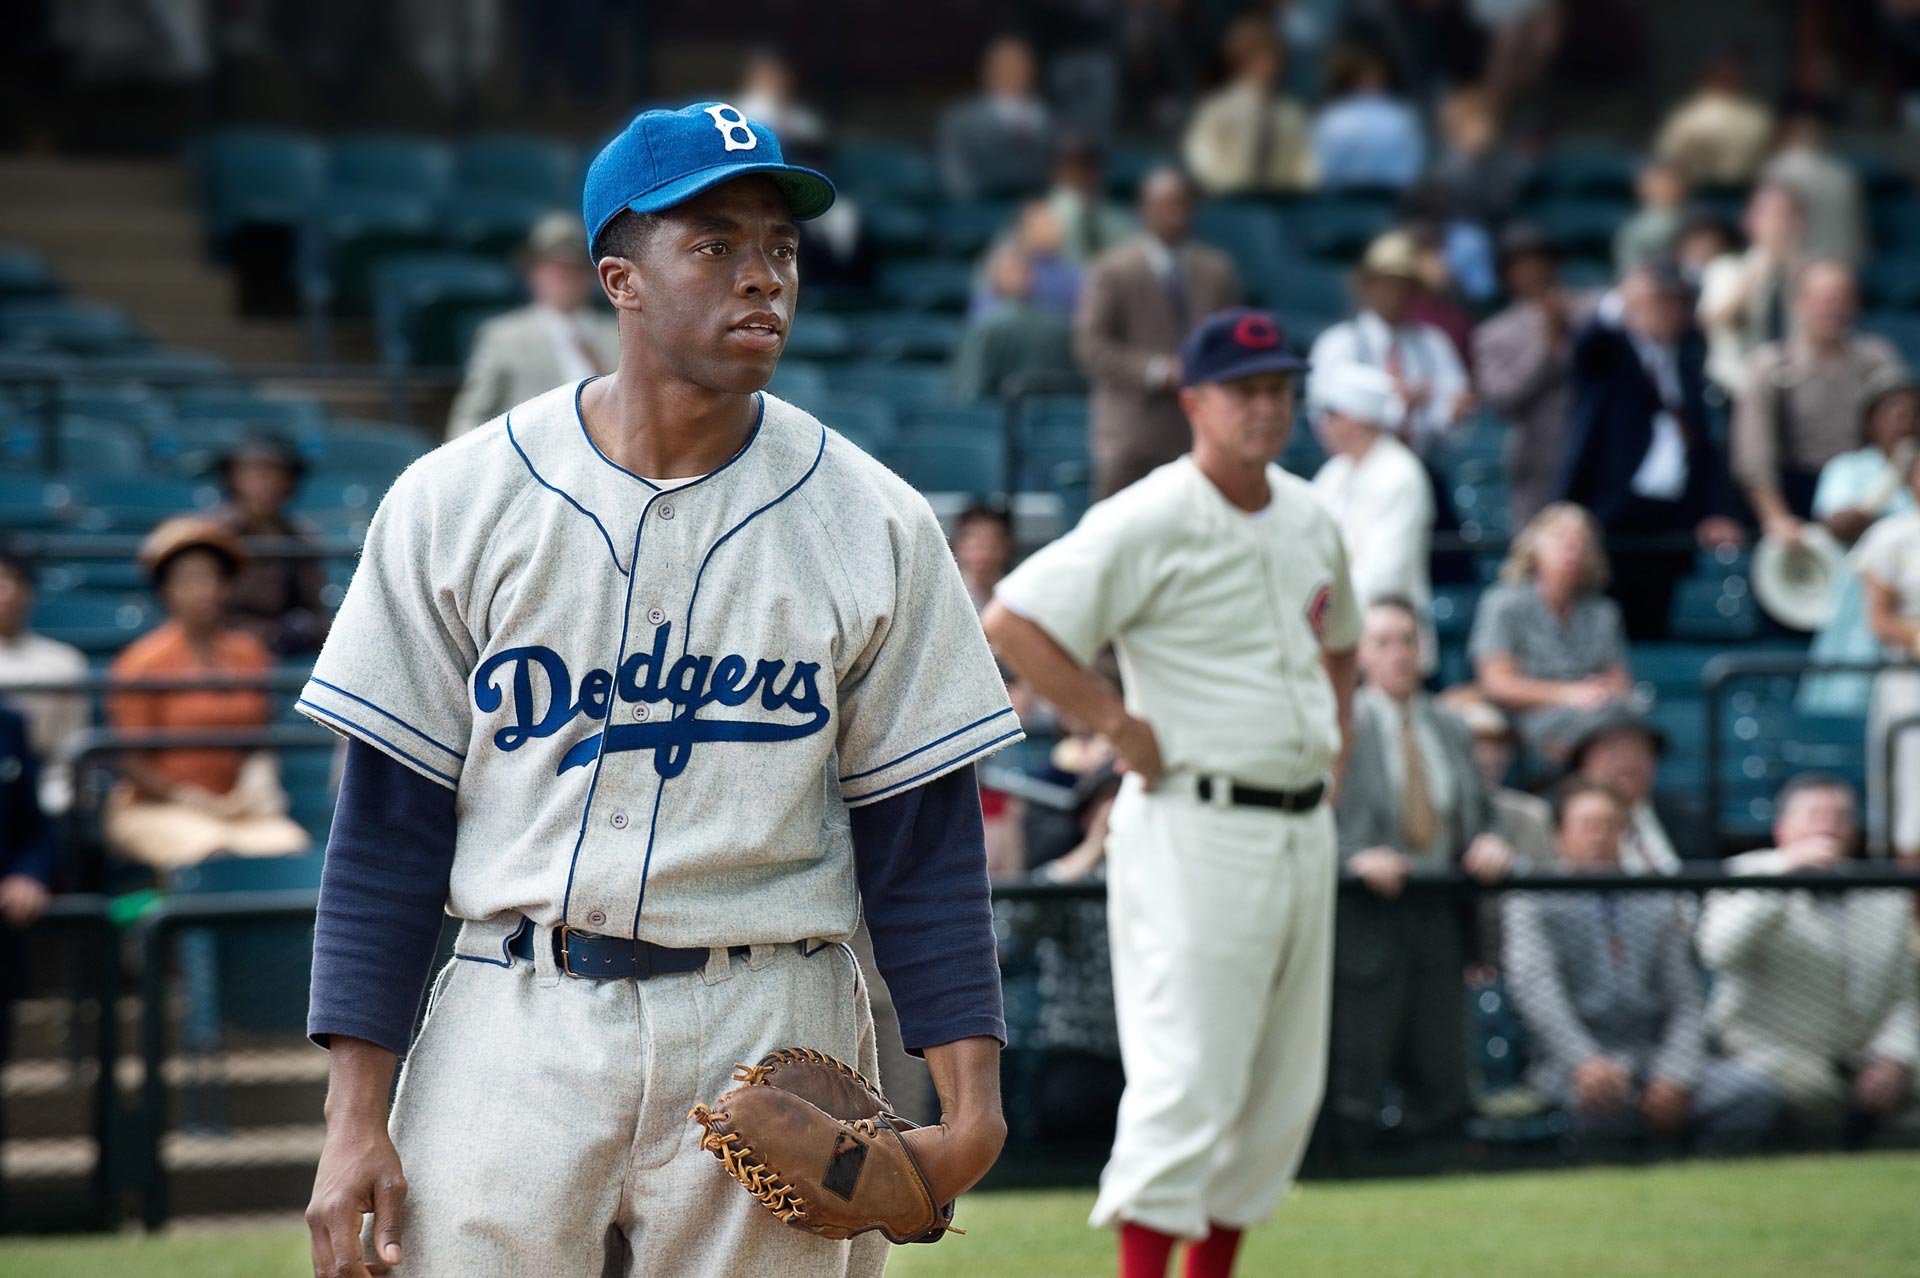 Remembering Jackie Robinson's historic play breaking the color